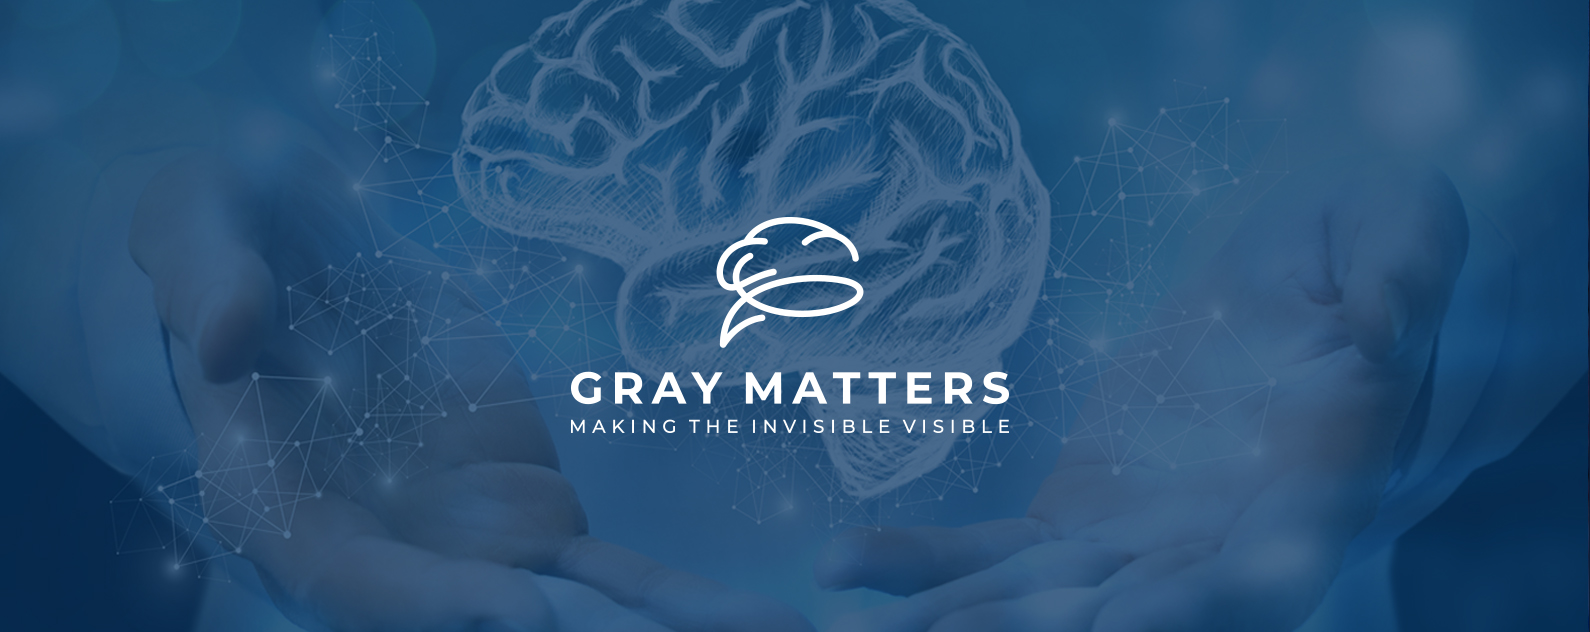 Gray matters front page